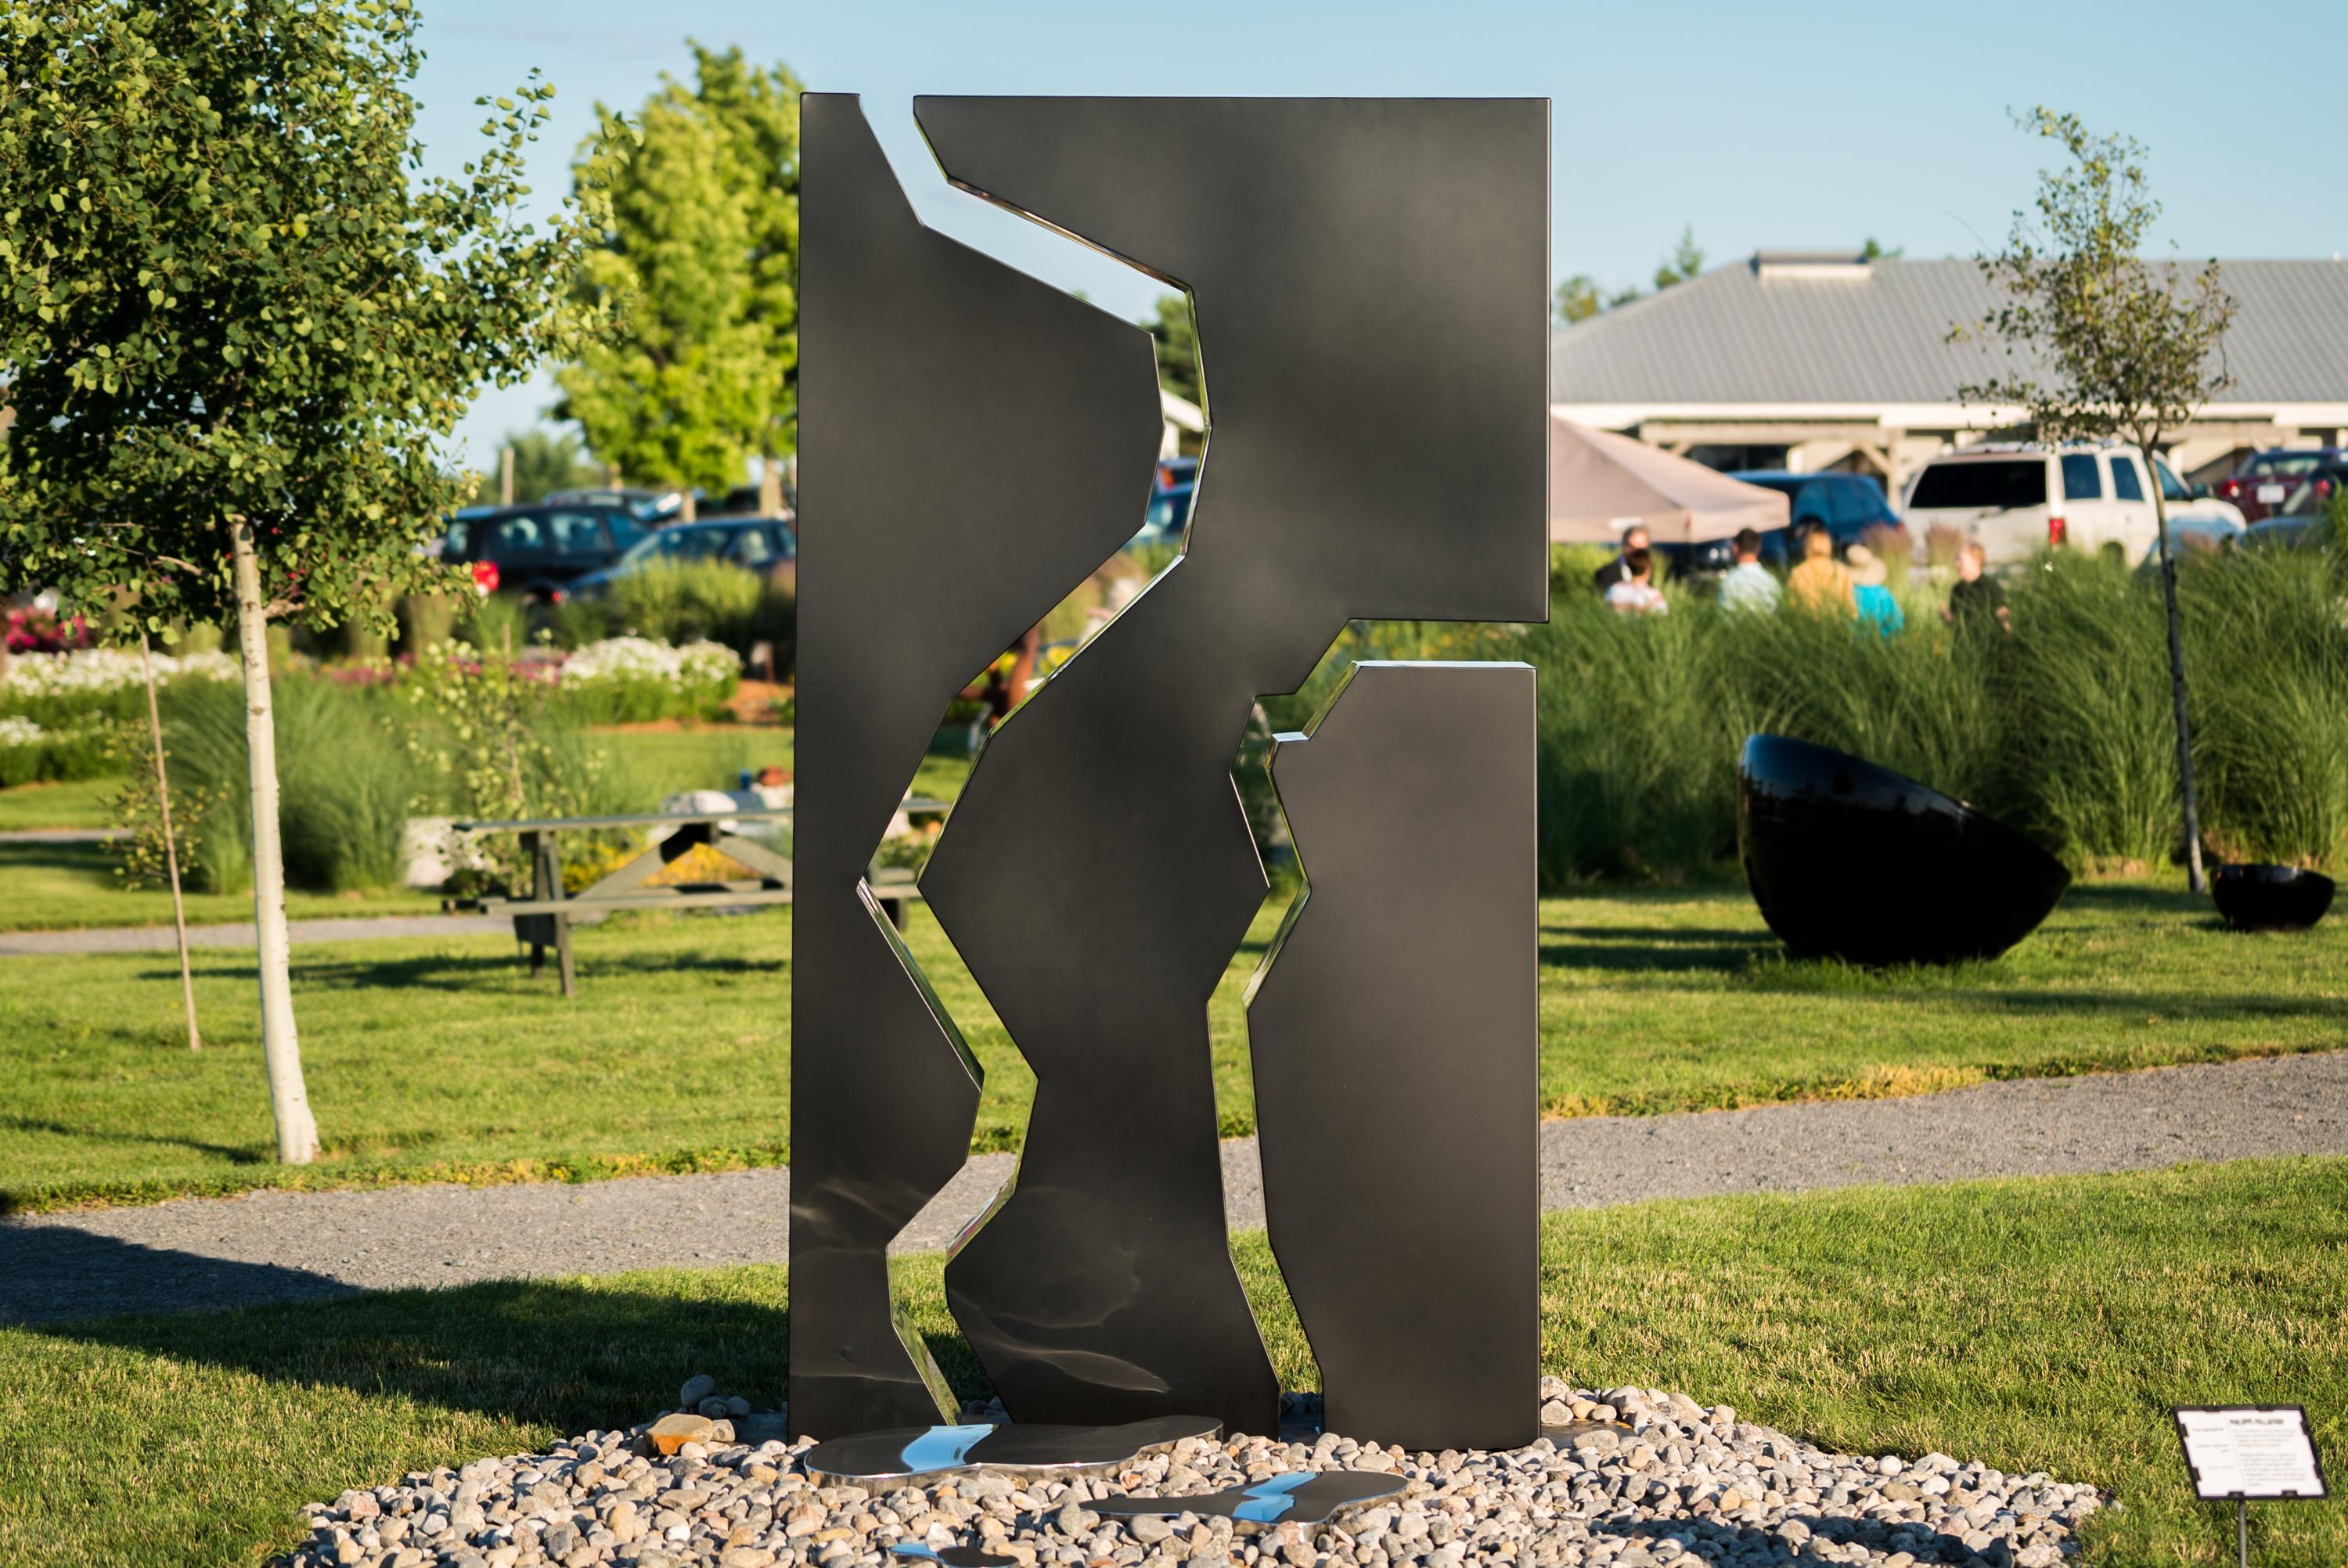 Aquagraphie Variation 2 - modern, geometric abstract, outdoor steel sculpture For Sale 5